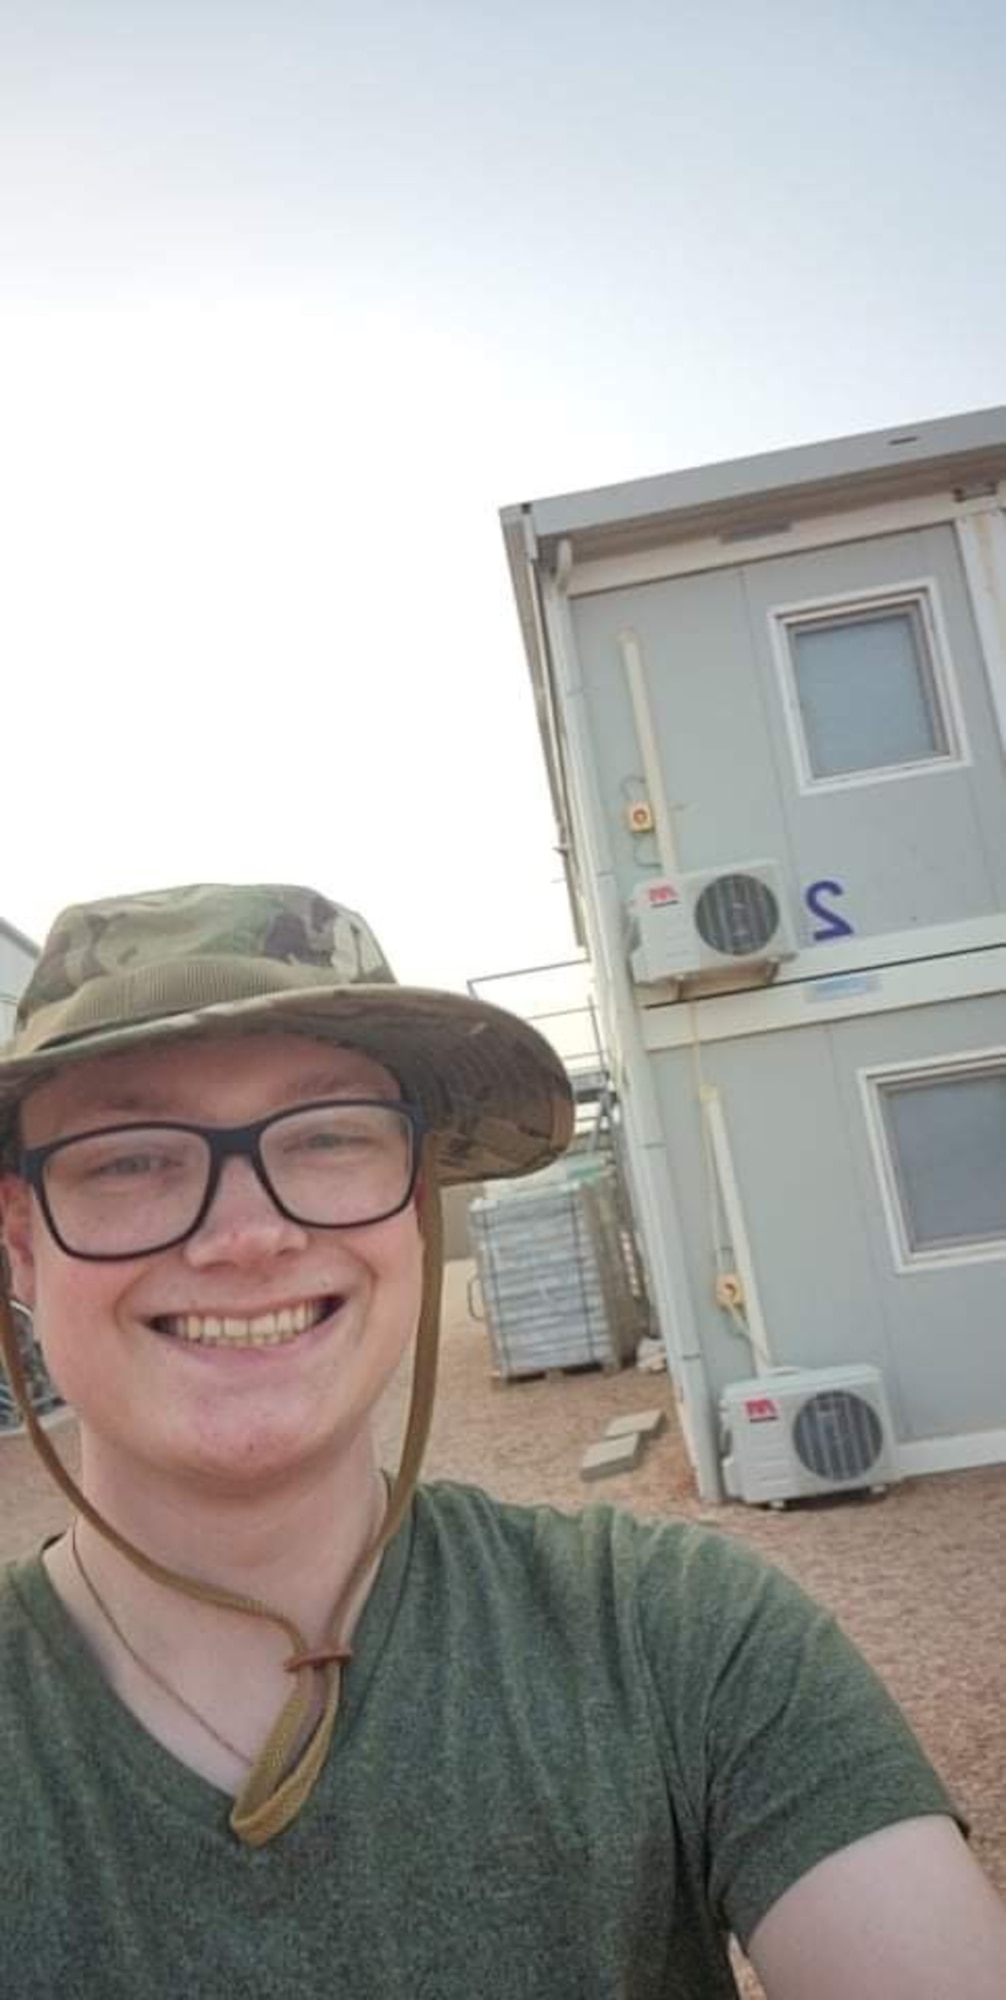 Senior Airman Caleb S. Kimmell smiles outside of his containerized living unit for his first deployment selfie. Kimmell arrived in Africa for his first deployment as a public affairs journeyman for the 435th Air Expeditionary Wing. (U.S. Air Force photo by Senior Airman Caleb S. Kimmell)